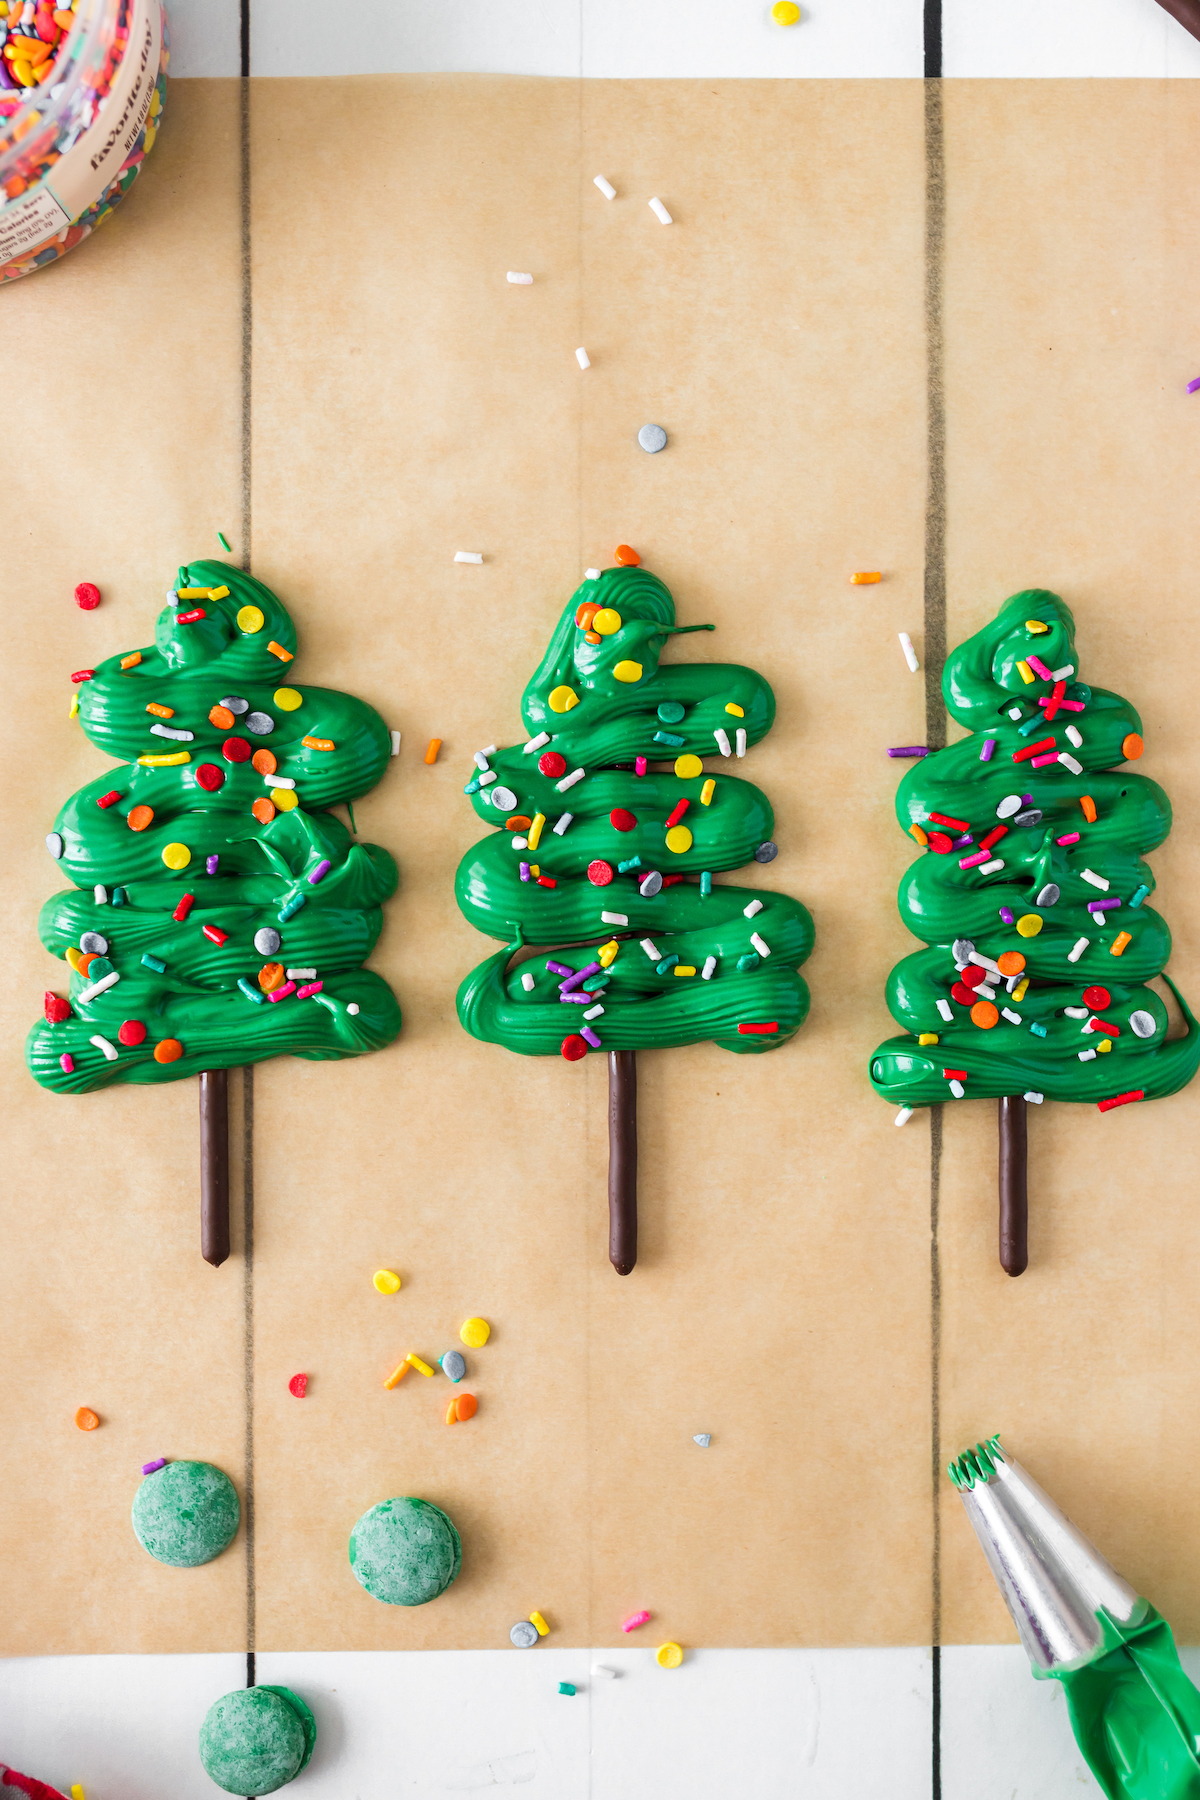 sprinkles added to chocolate and pocky christmas trees